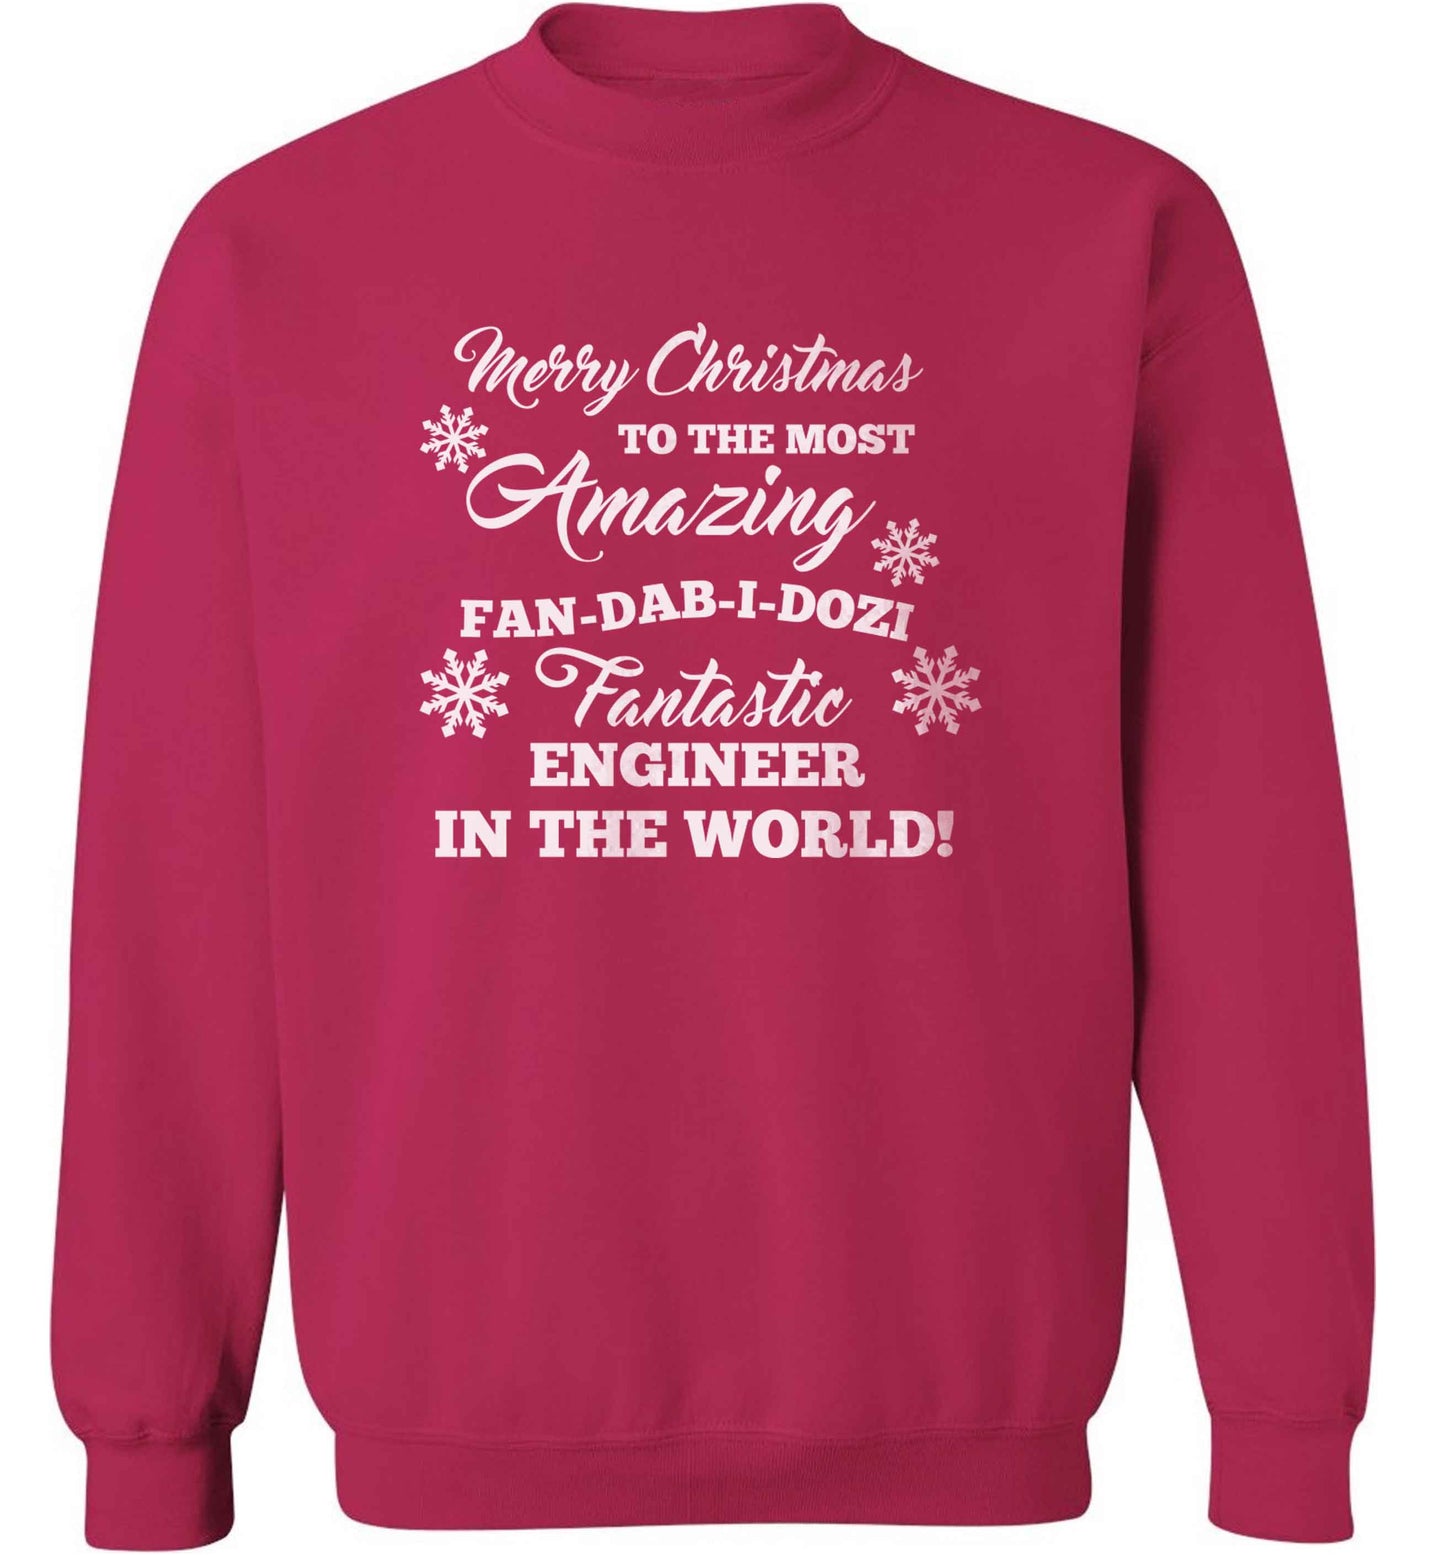 Merry Christmas to the most amazing engineer in the world! adult's unisex pink sweater 2XL